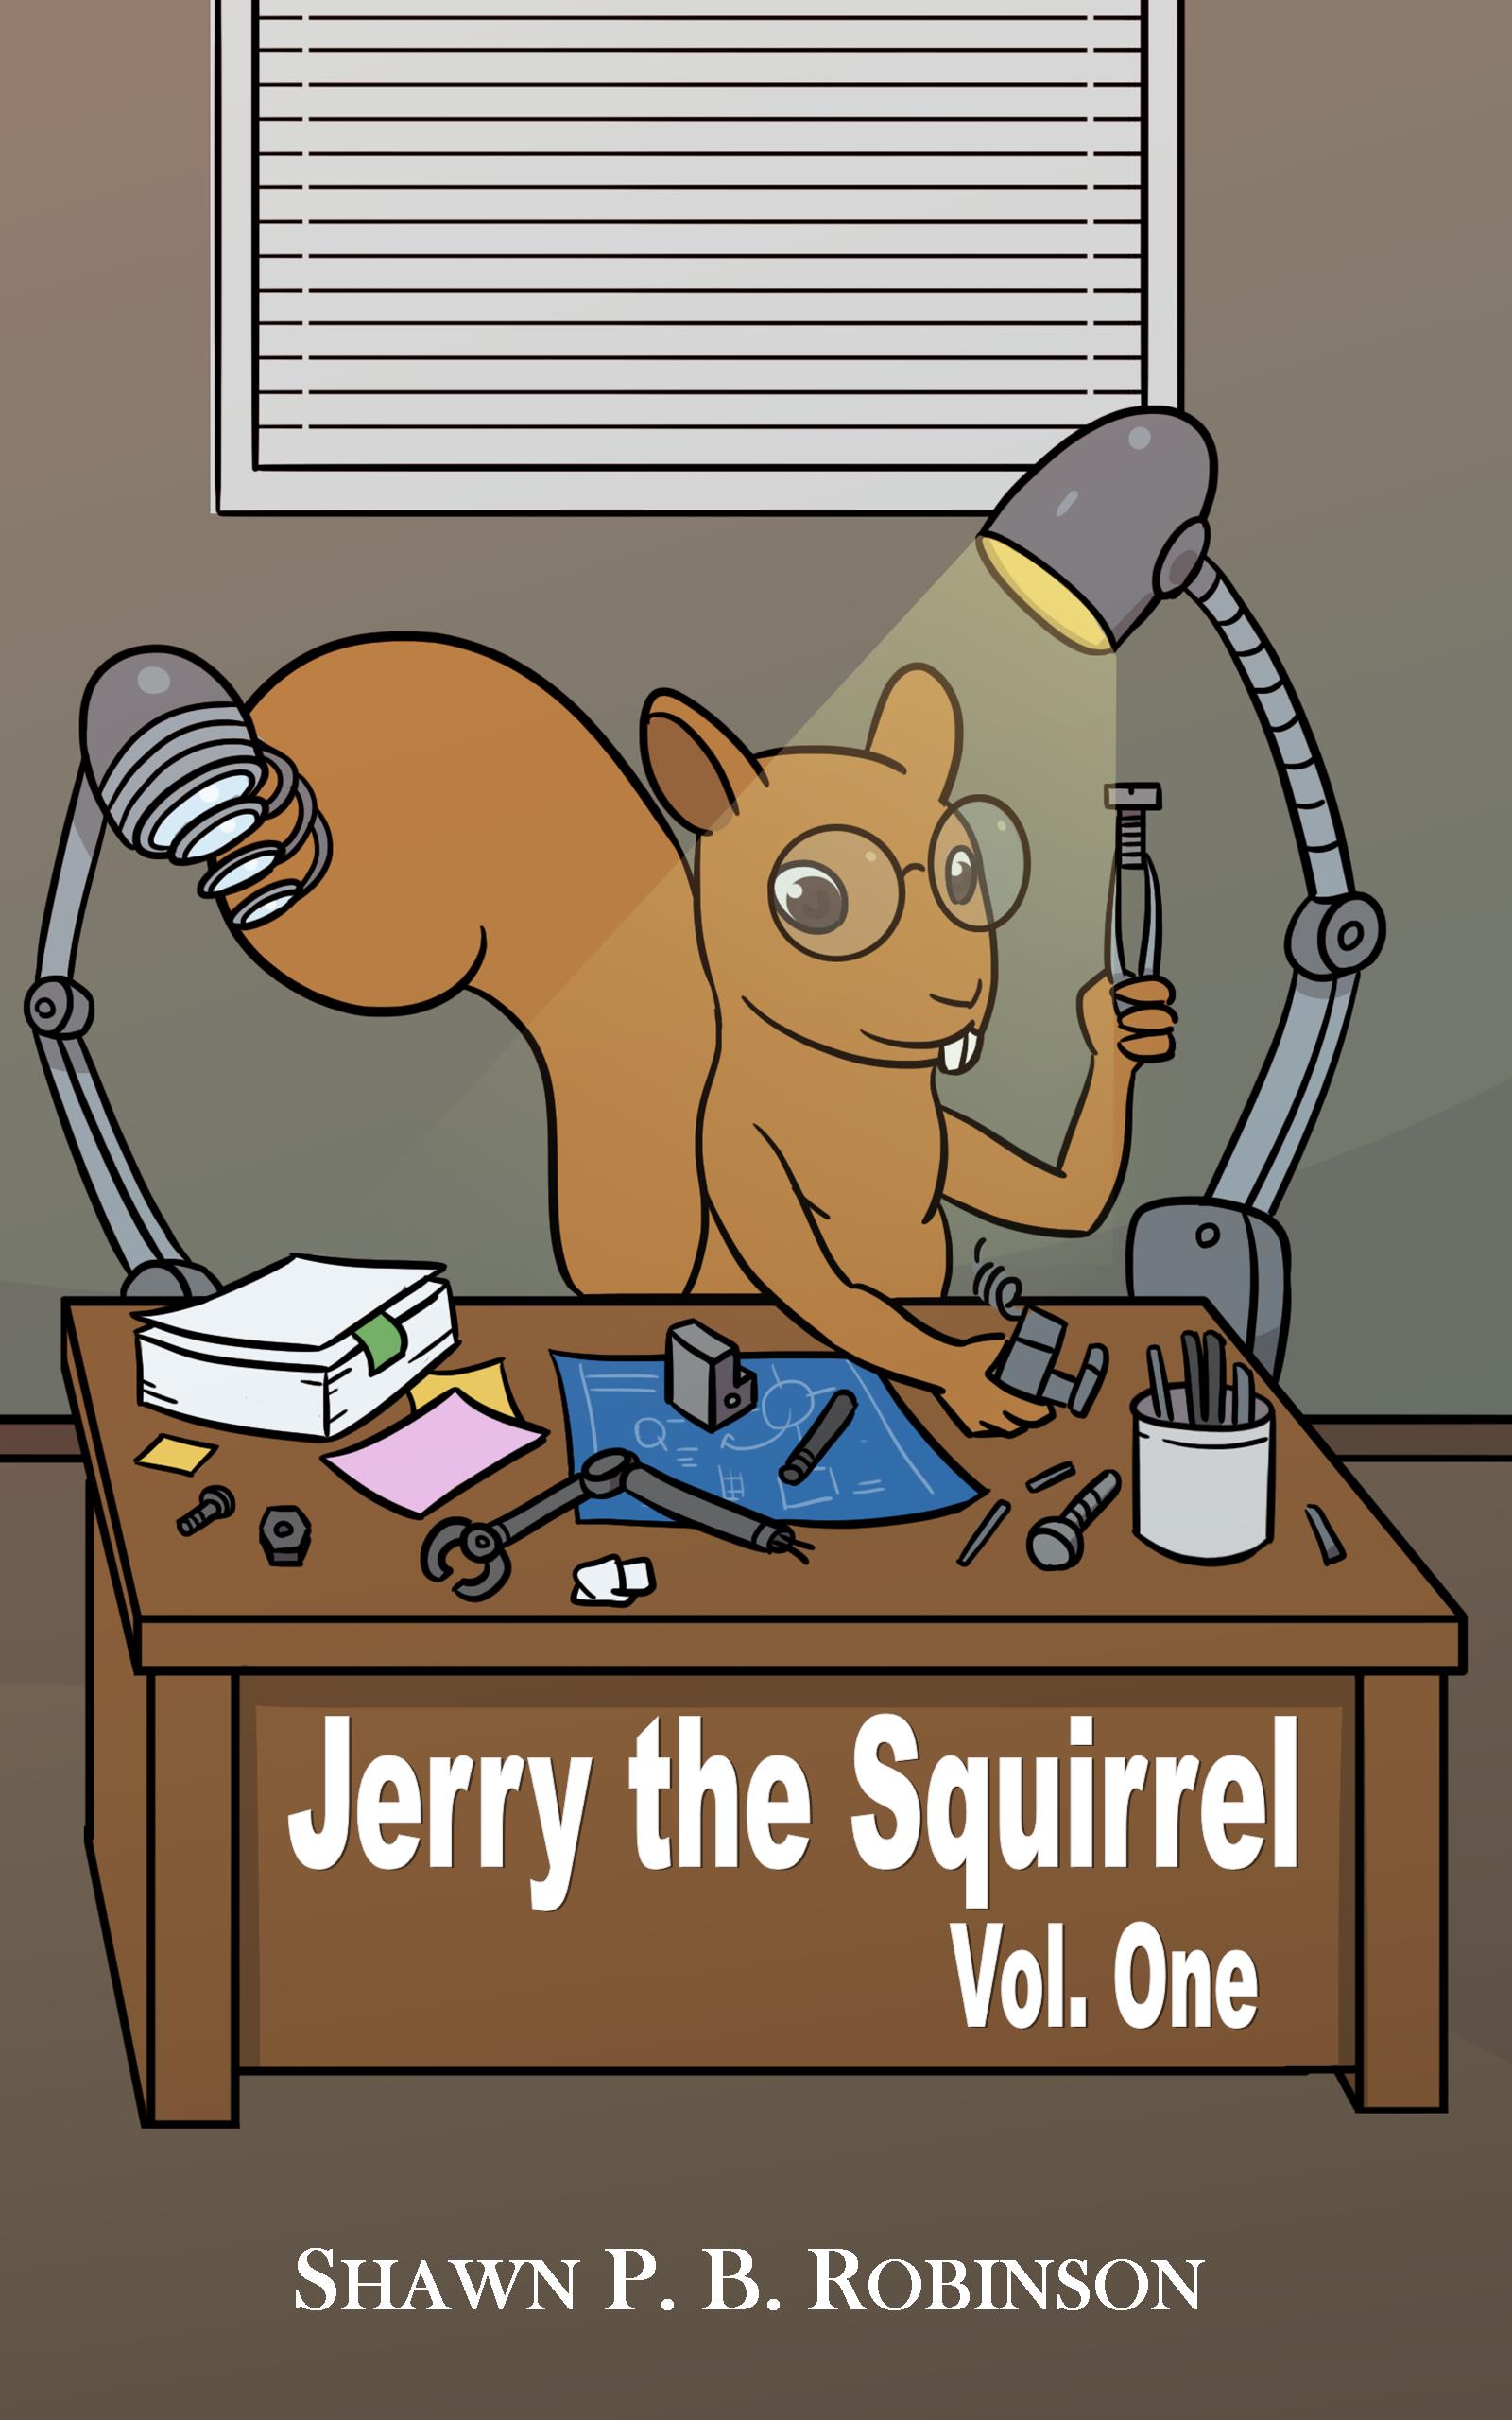 Free Jerry the Squirrel ebook this weekend!!